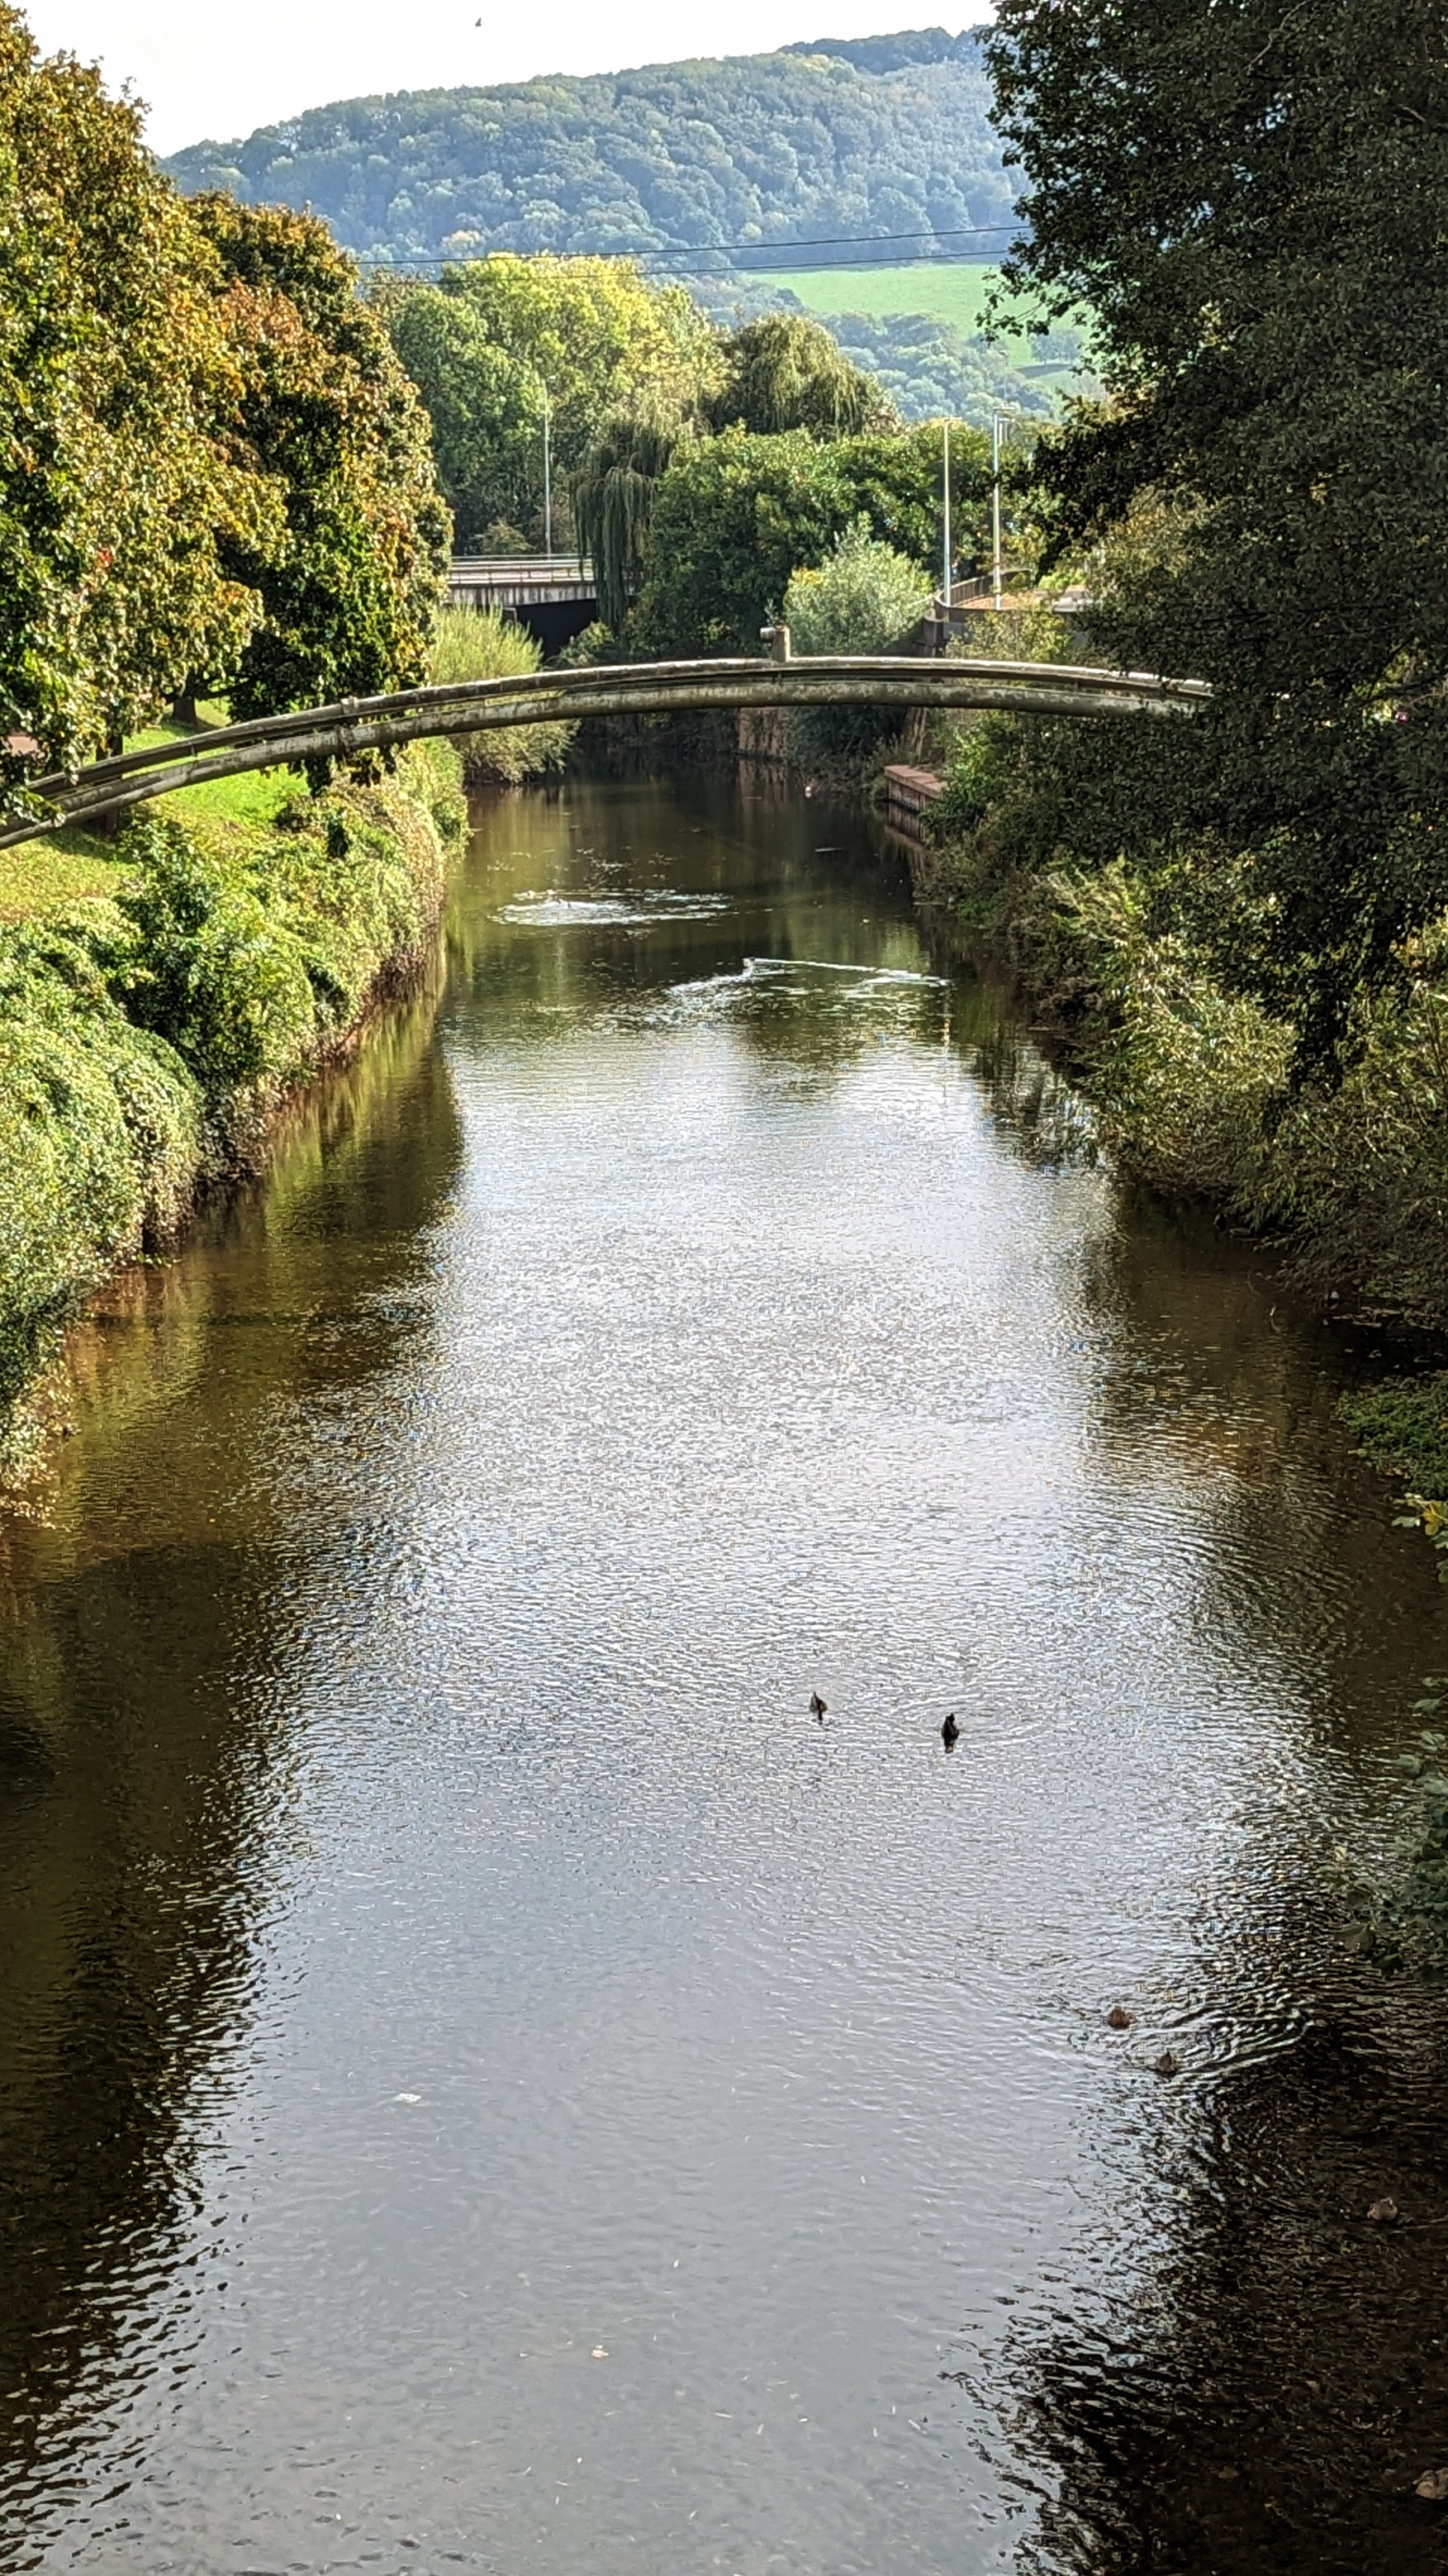 The shallow River Monnow flows away, green banks and trees either side with a pipes arching over and a road bridge in the distance. Wooded hills in the distance.